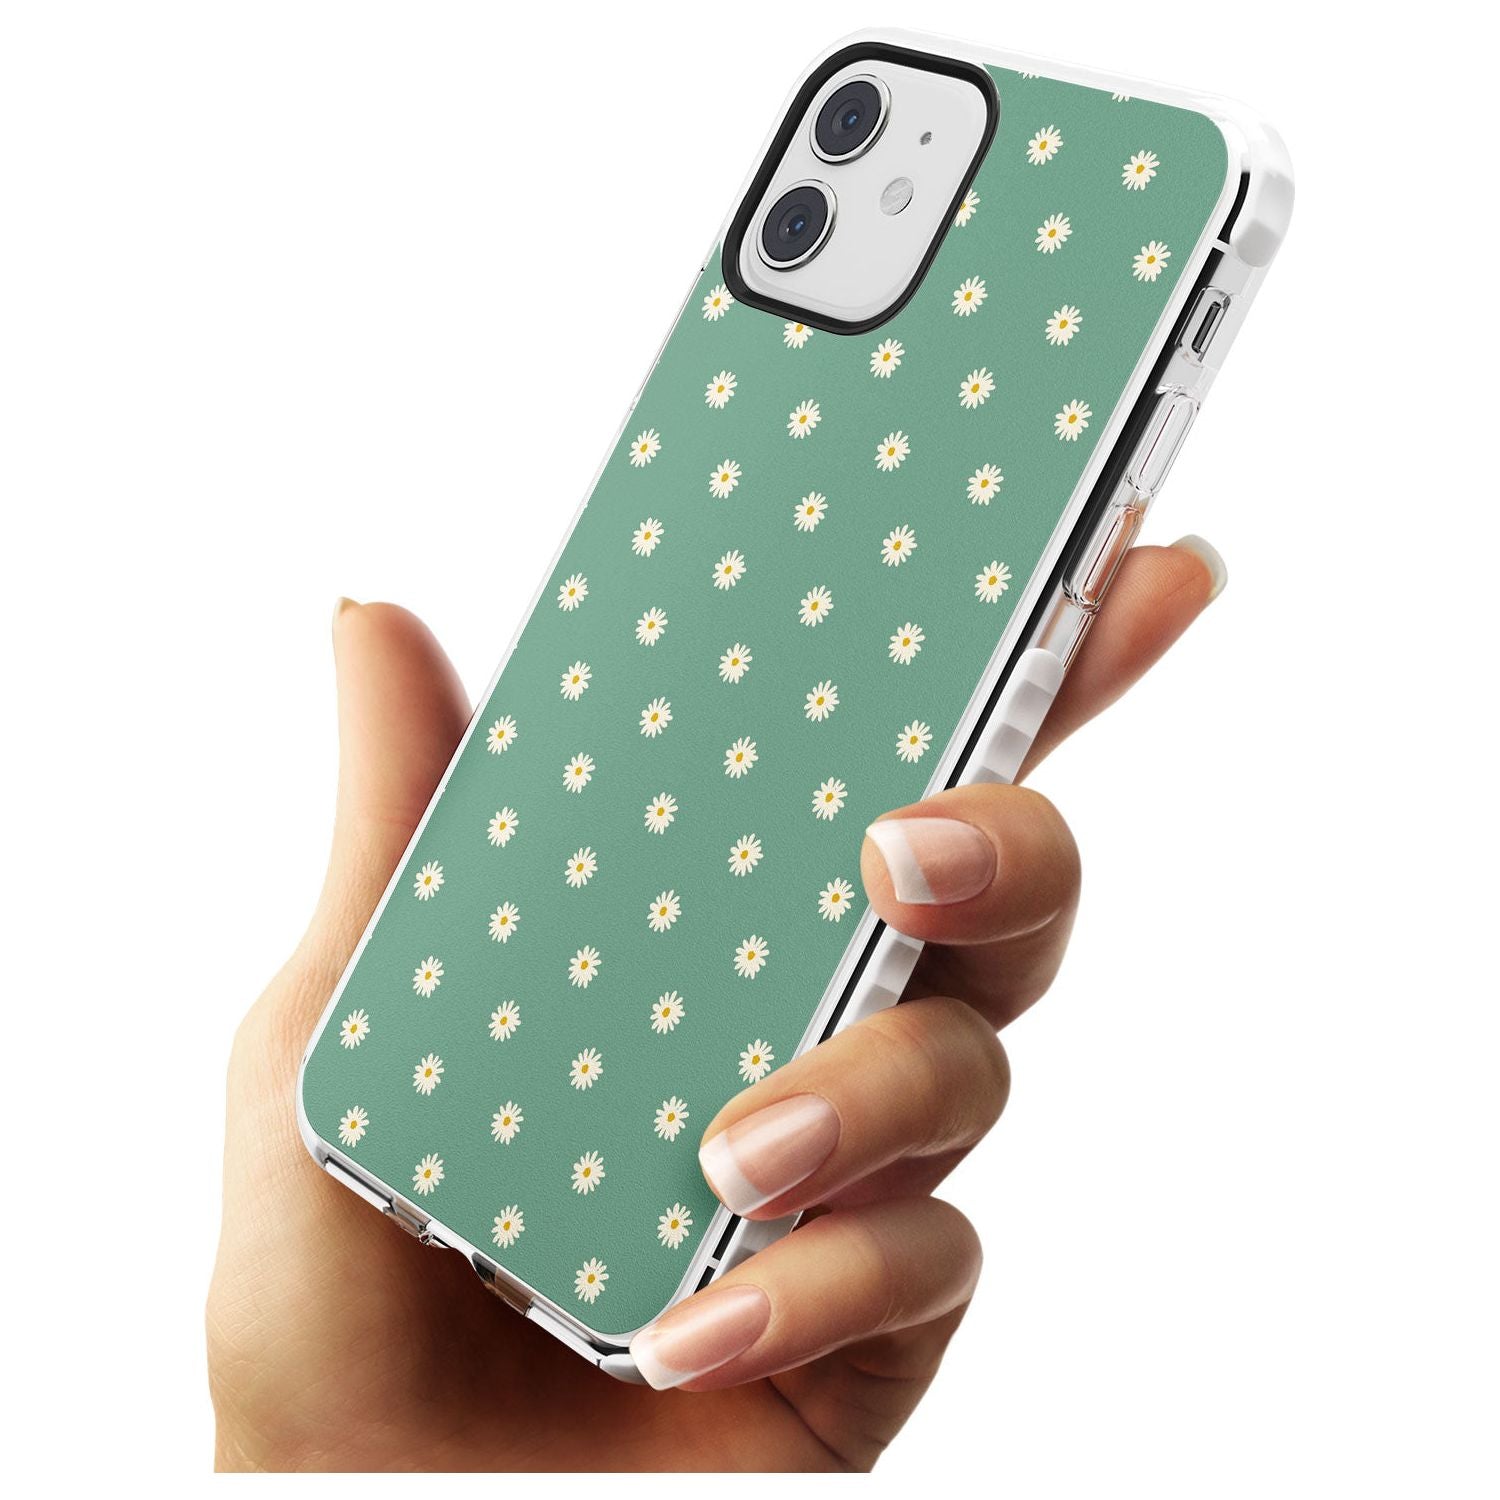 Daisy Pattern - Teal Cute Floral Daisy Design Slim TPU Phone Case for iPhone 11